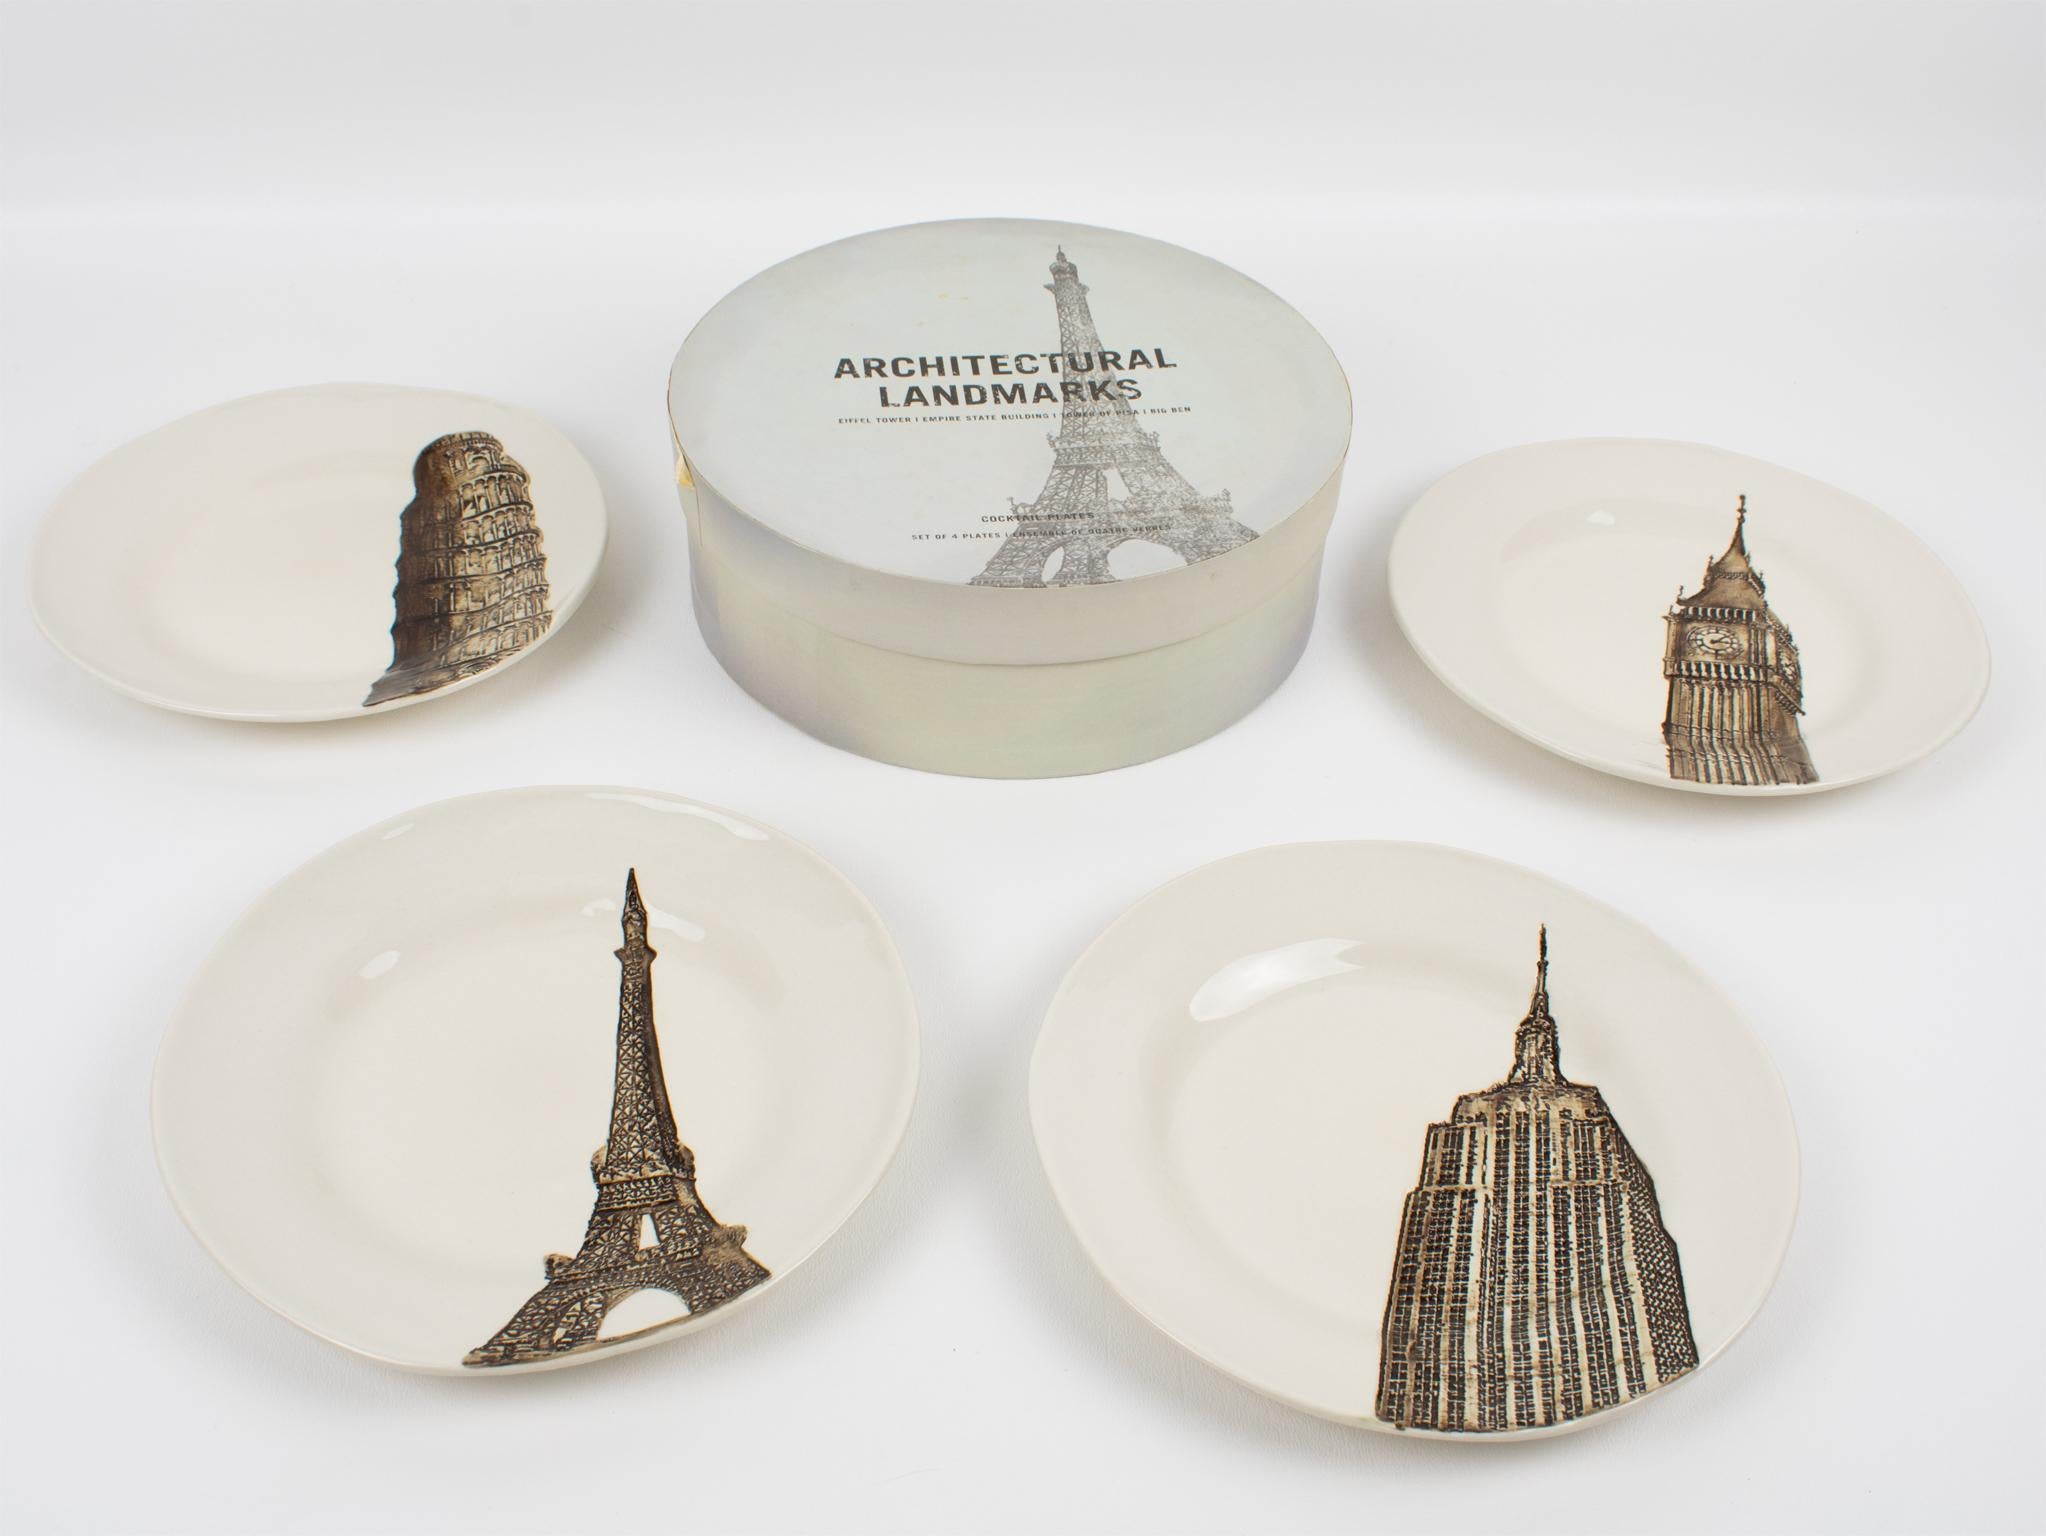 Designed by a small, family-run workshop in South Africa named Mud Studio, those fabulous Restoration Hardware cocktail plates capture the magnificence of the world's major landmarks. Crafted by hand, artisans stamp the ivory-glazed stoneware with